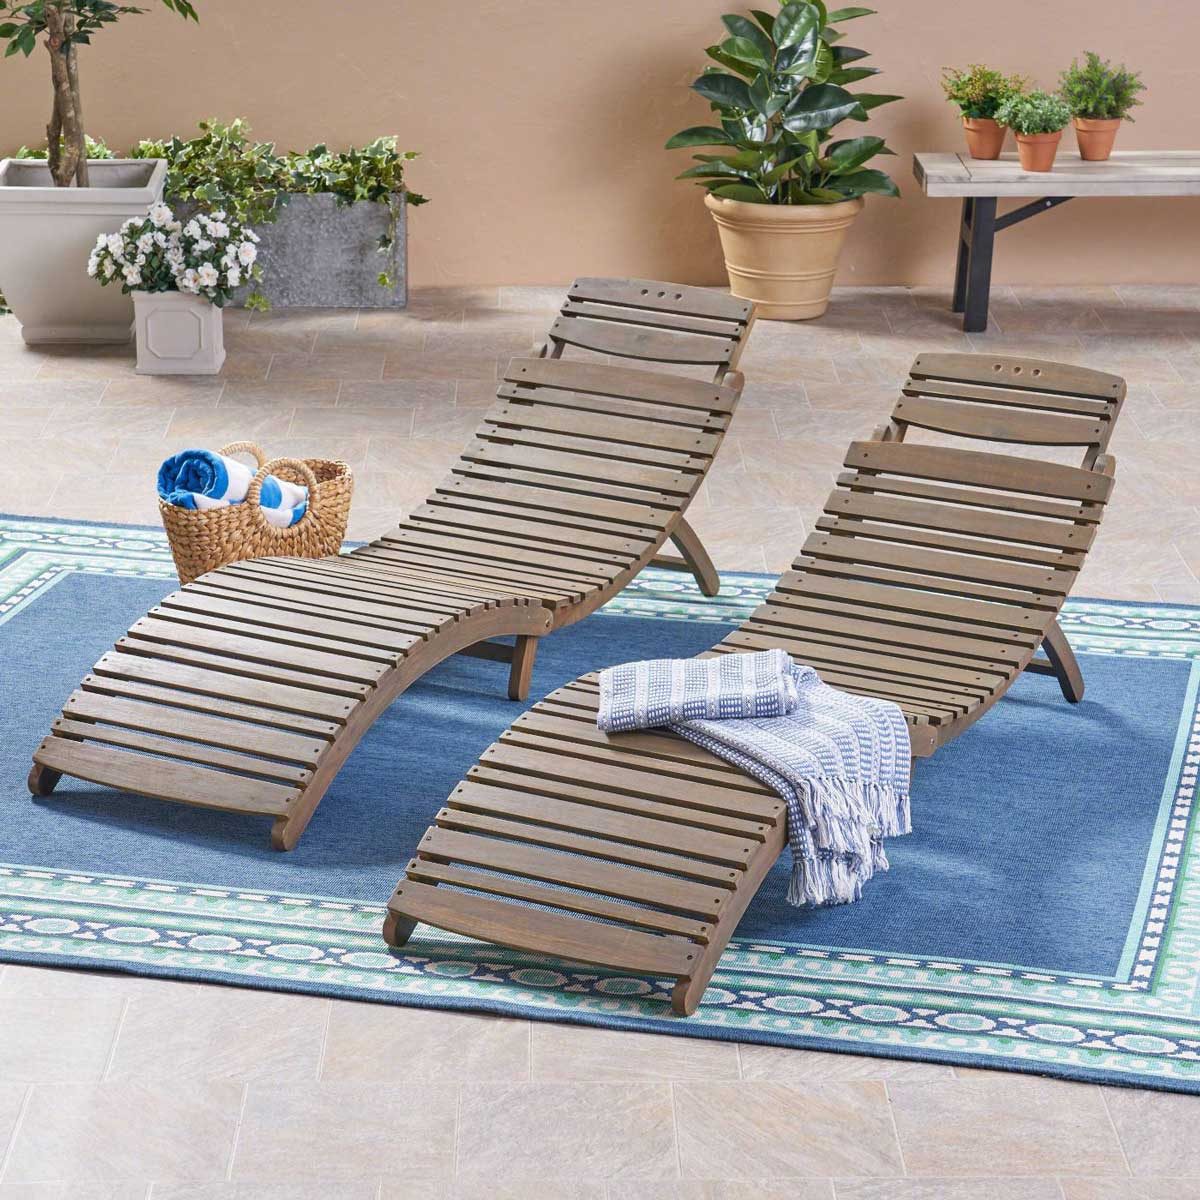 10 Best Outdoor Lounge Chairs | The Family Handyman